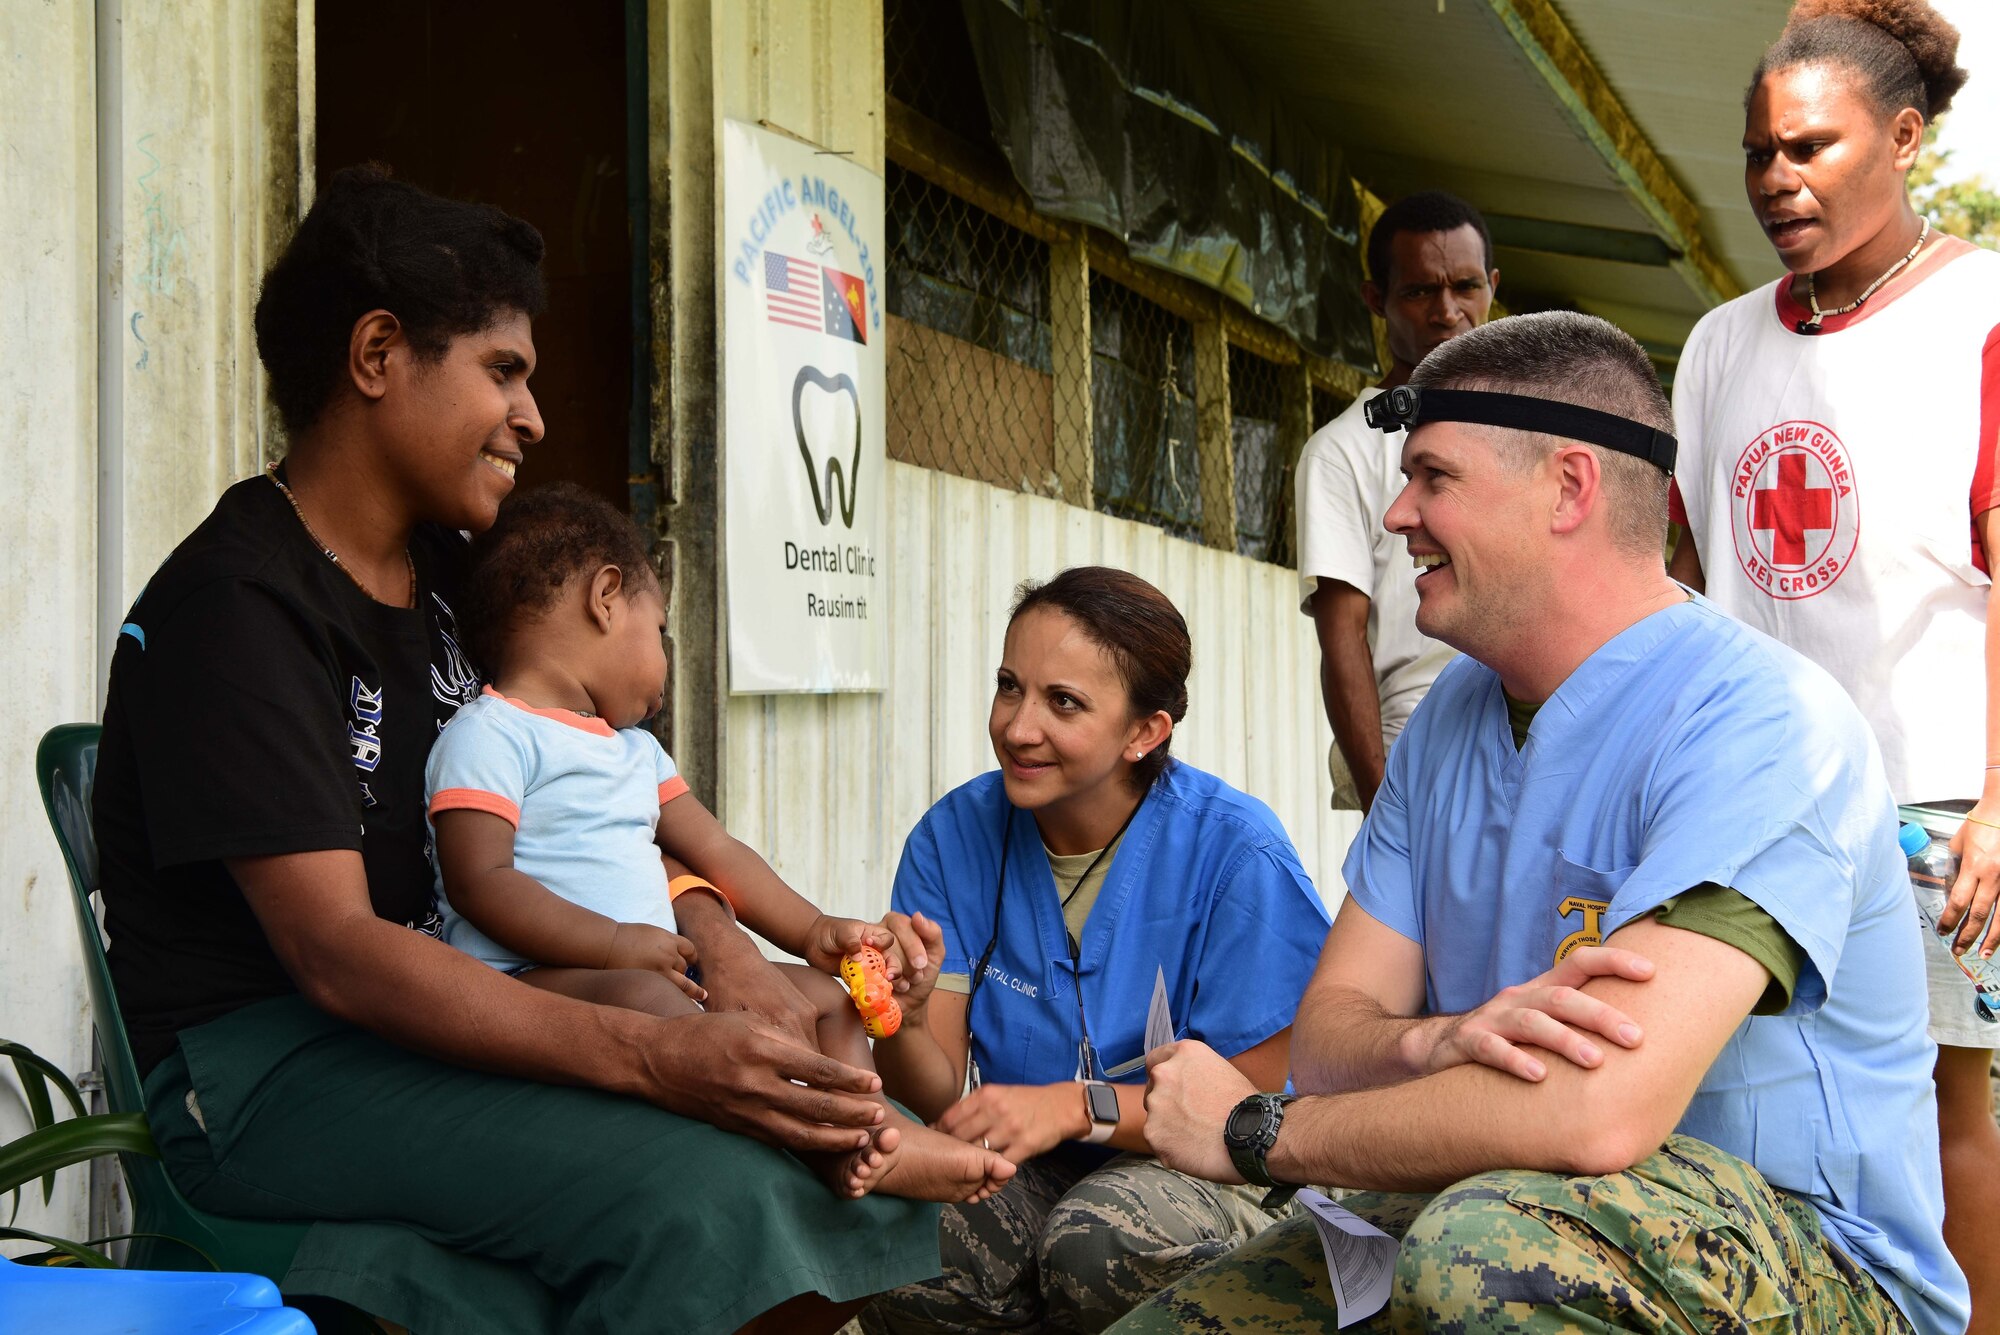 U.S. Navy LT Austin Stokes and U.S. Air Force Maj. Nicole Smith, both Pacific Angel 19-4 dentists, talk to a patient at the PAC ANGEL 19-4 health outreach site in Lae, Papua New Guinea Sept. 8, 2019. The health outreach site is comprised of five clinics including primary care, optometry, dental, physical therapy and pharmacy. (U.S. Air Force photo by Tech. Sgt. Jerilyn Quintanilla)